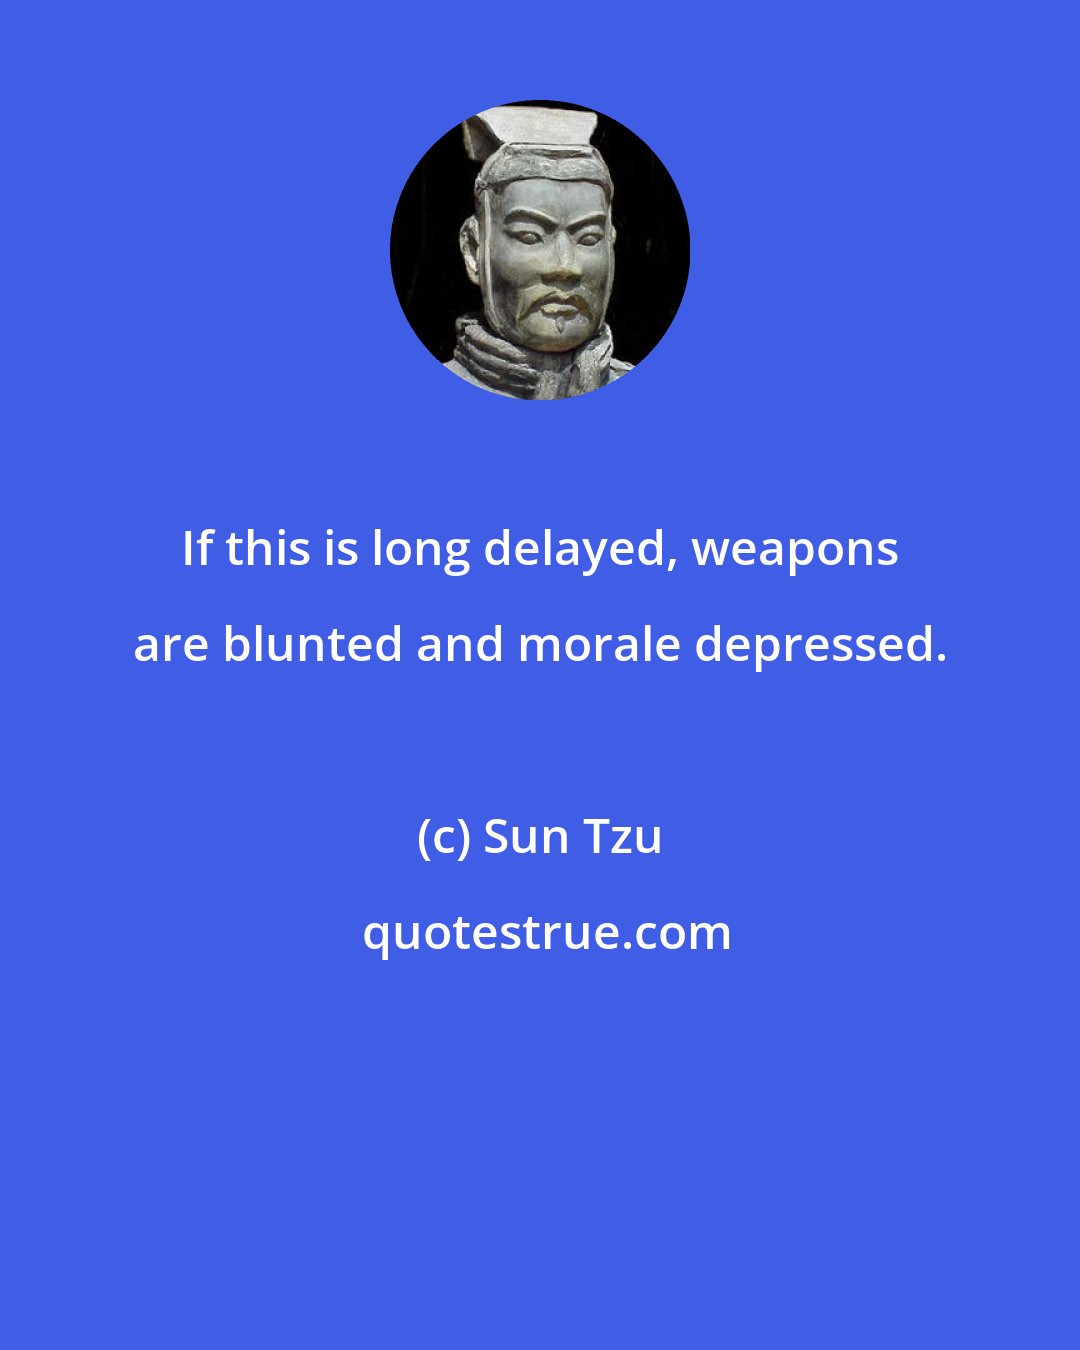 Sun Tzu: If this is long delayed, weapons are blunted and morale depressed.